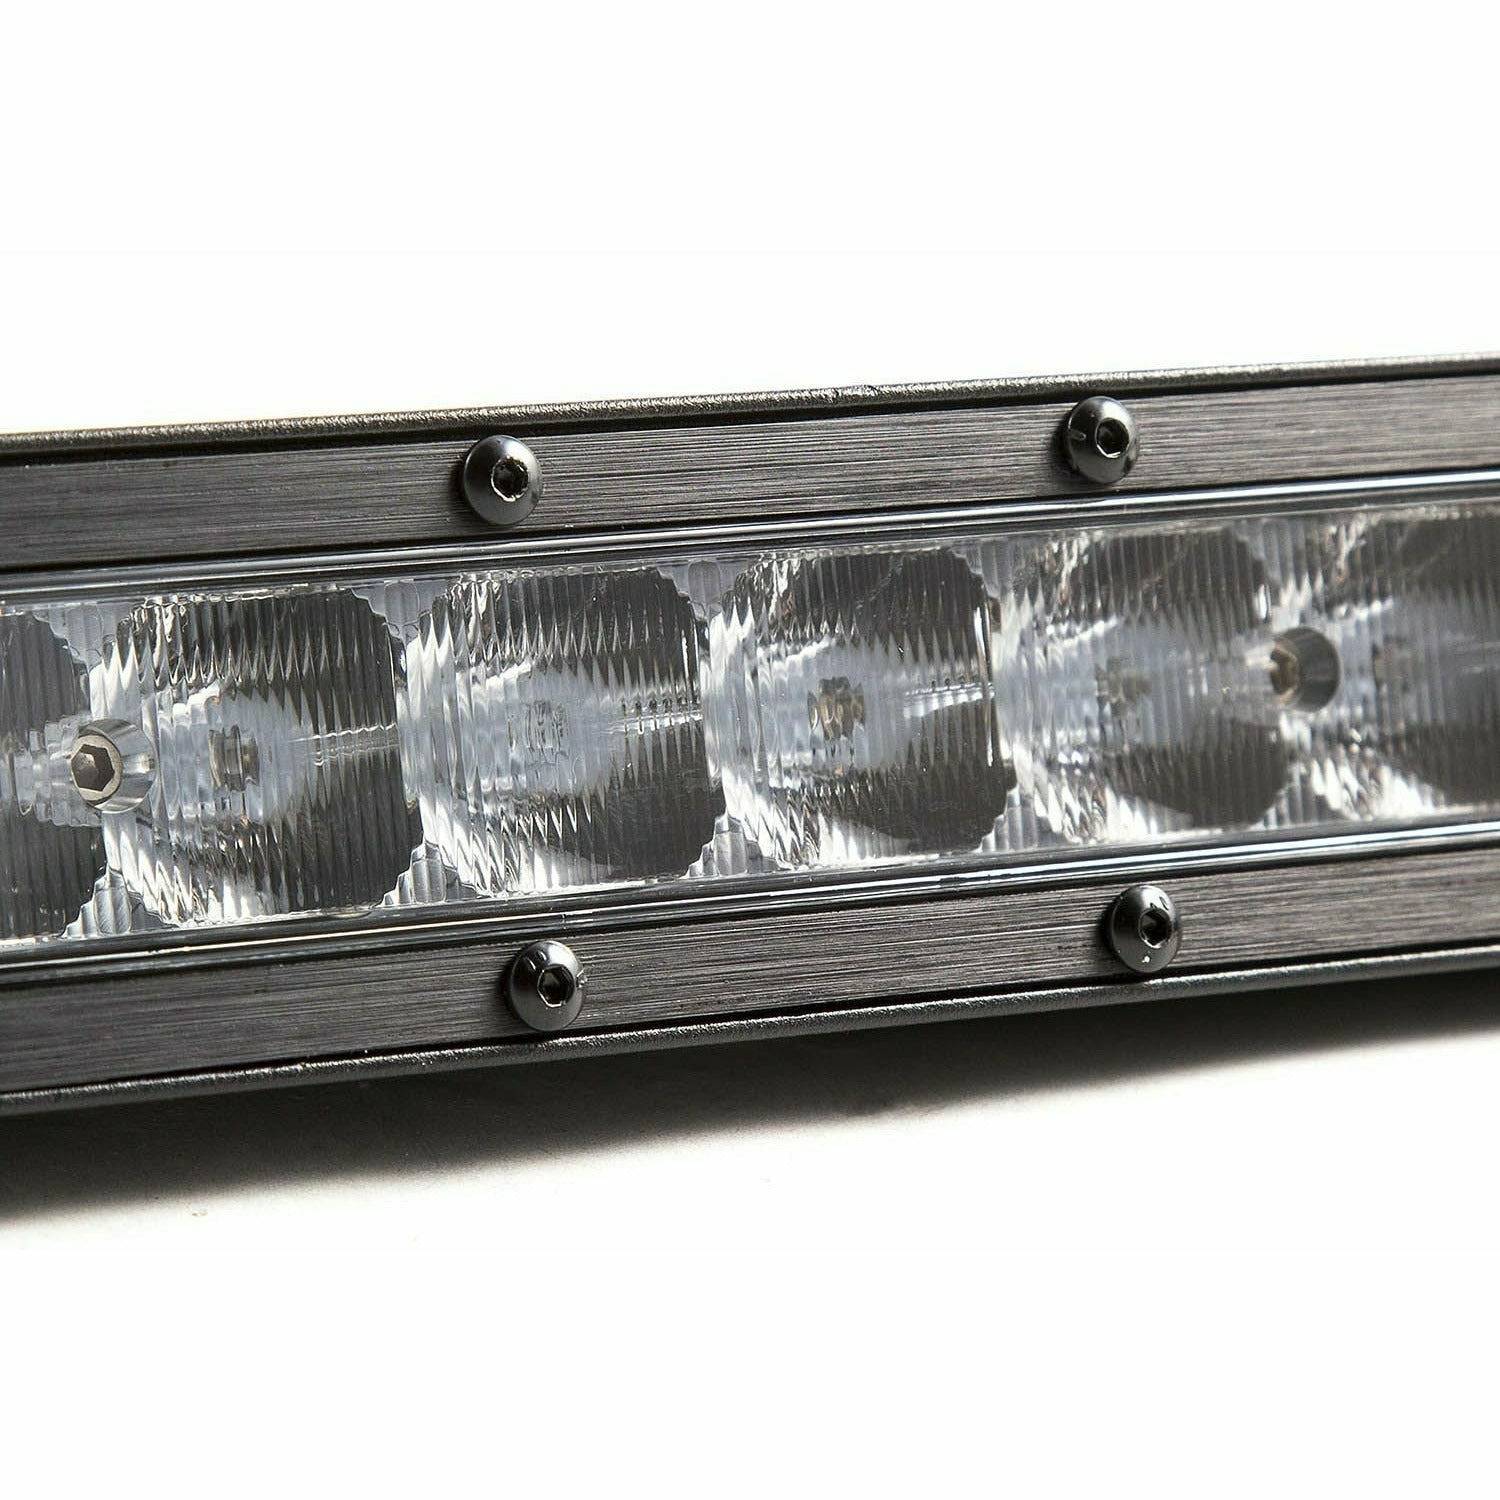 Diode Dynamics Stage Series 42" Light Bar